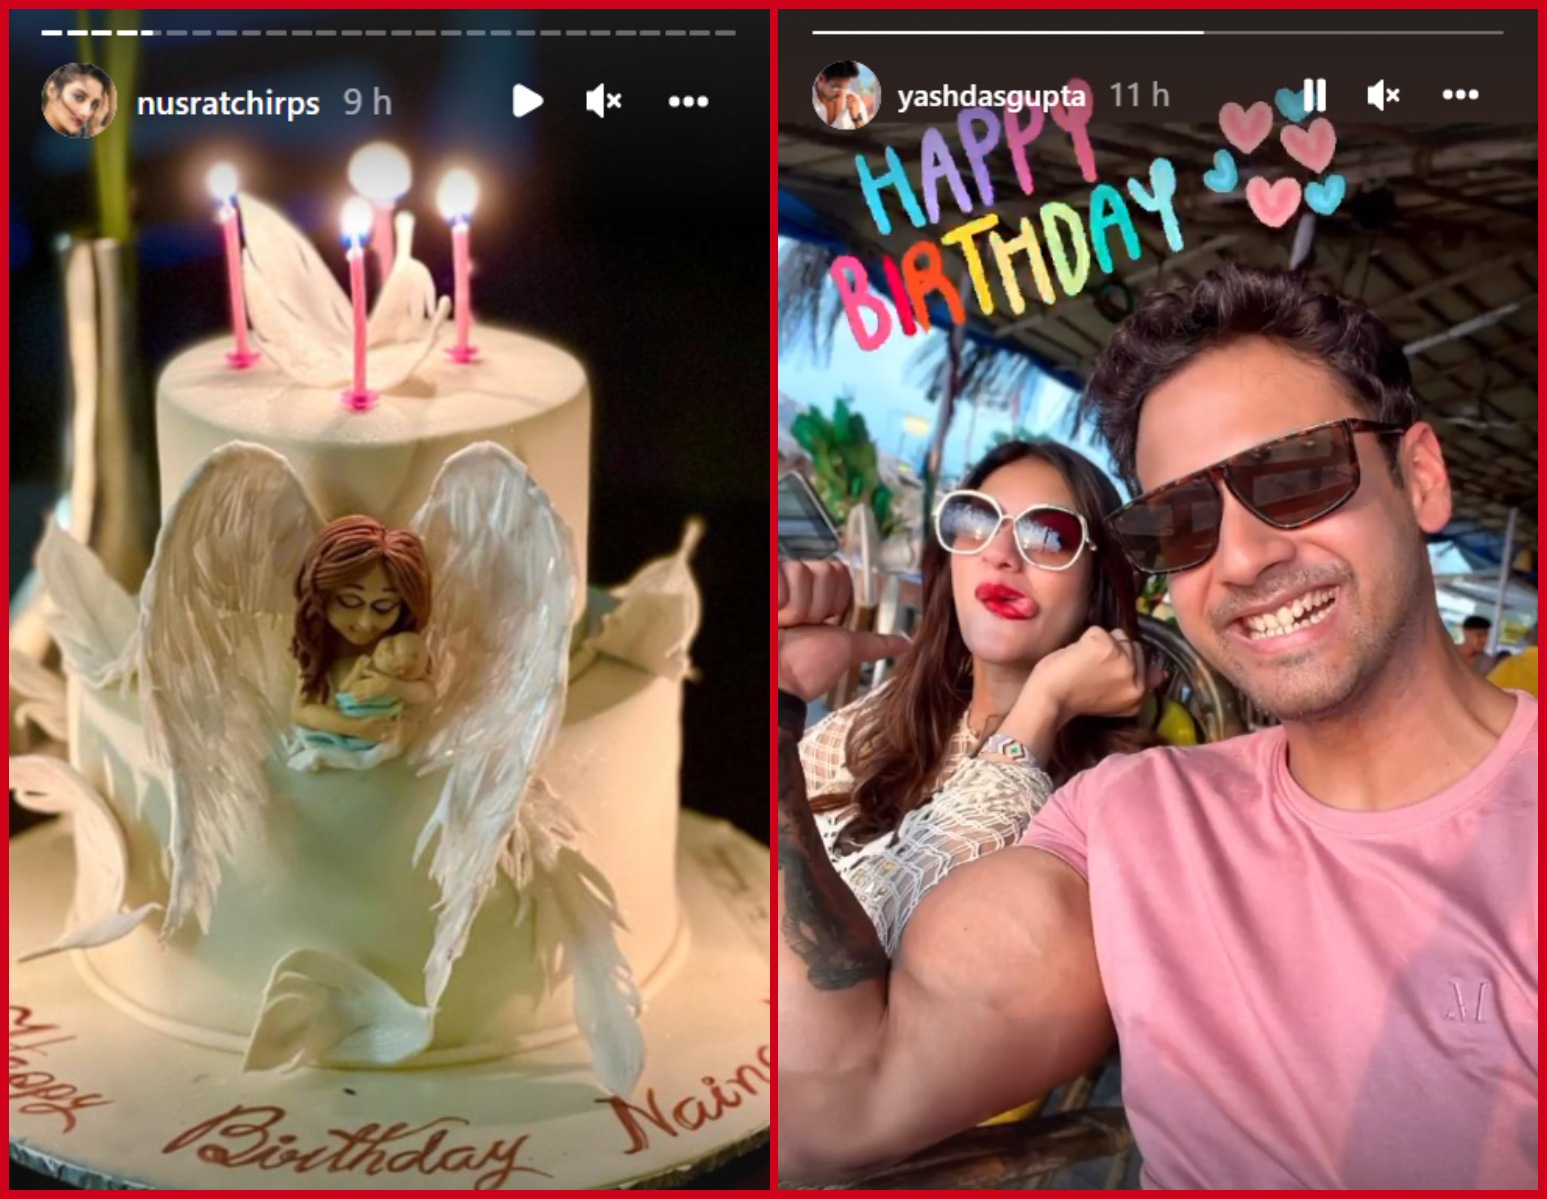 Nusrat Jahan shared a glimpse of her birthday cake, while Yash Dasgupta wished her on Instagram.